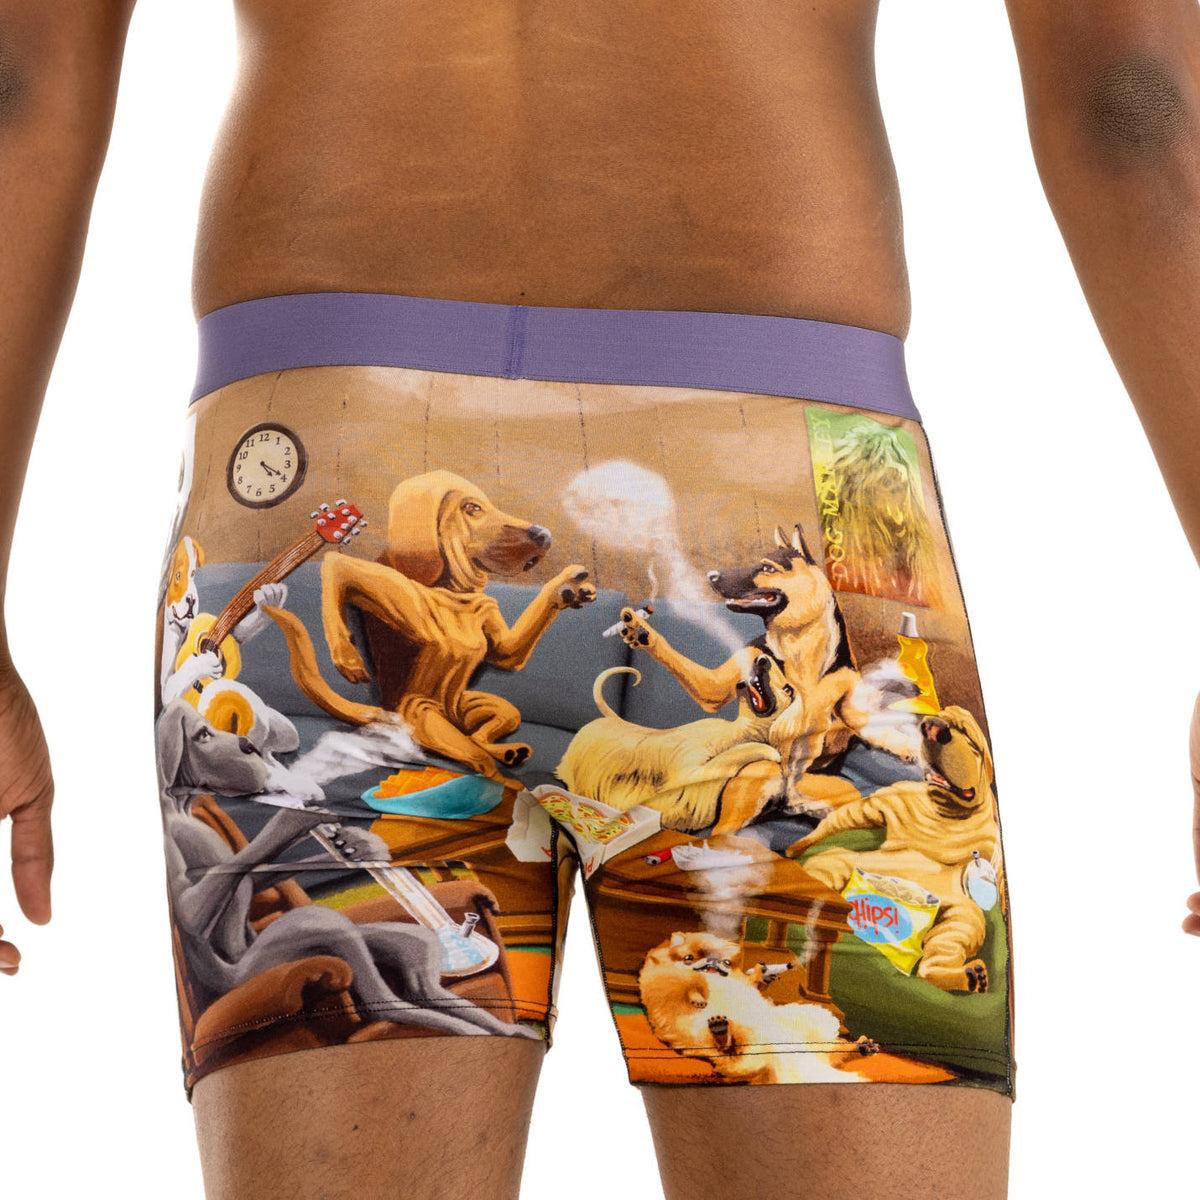 French Bulldog Frenchie Underpants Homme Panties Man Underwear